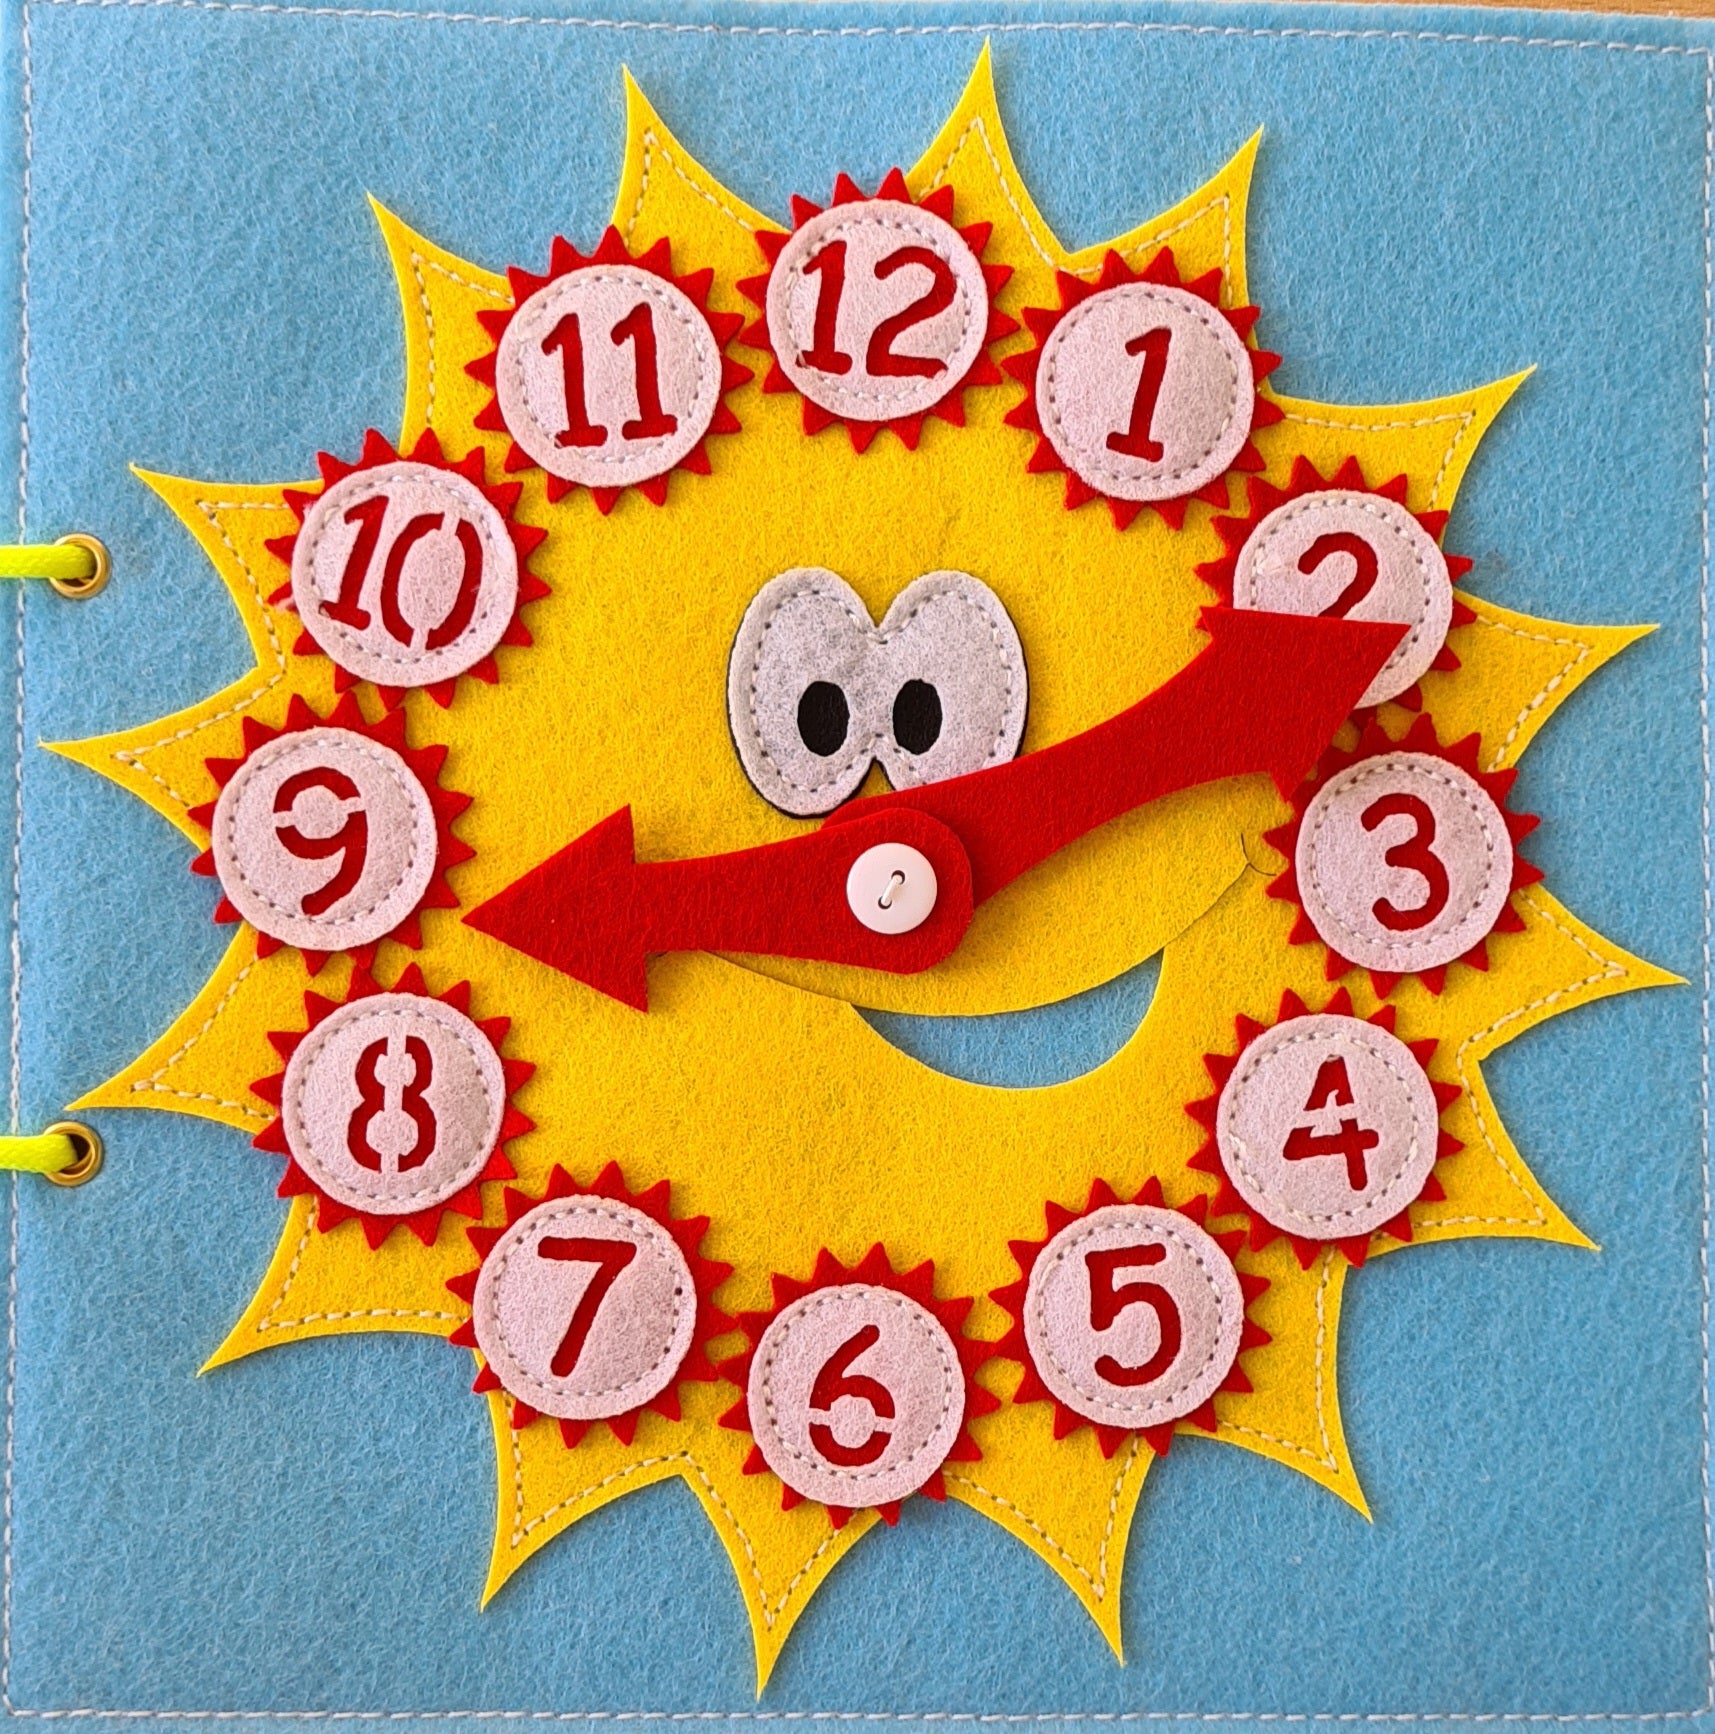 Clock - What's the time, Counting from 1-12